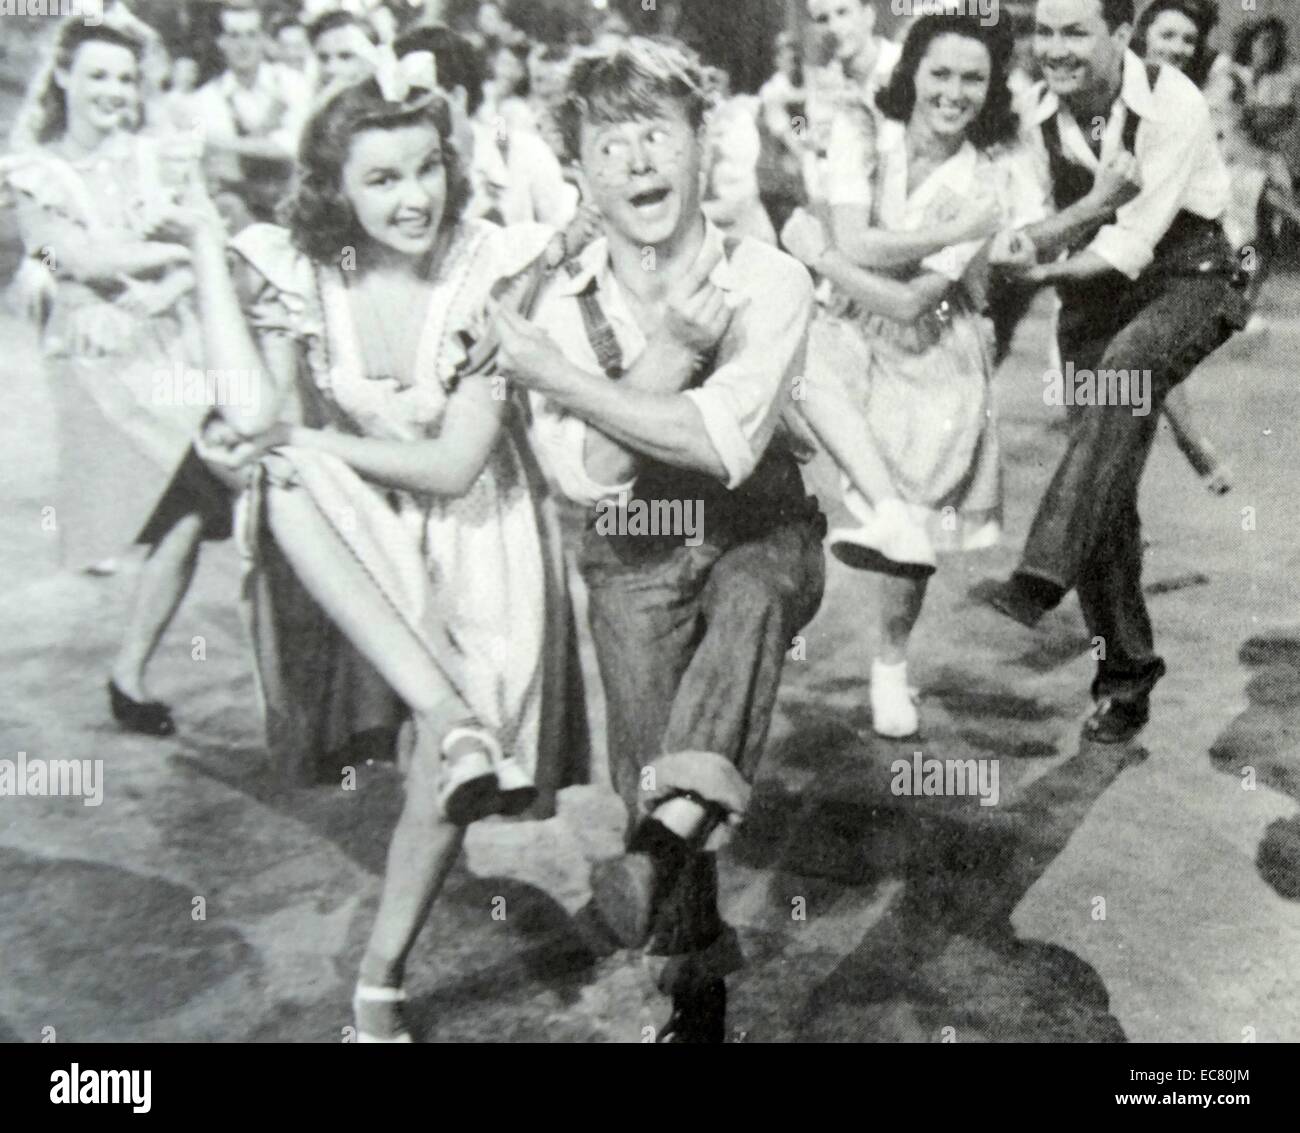 Stage Door Canteen, 1943.  Katherine Cornell and Aline MacMahon serve the soldiers. Stock Photo